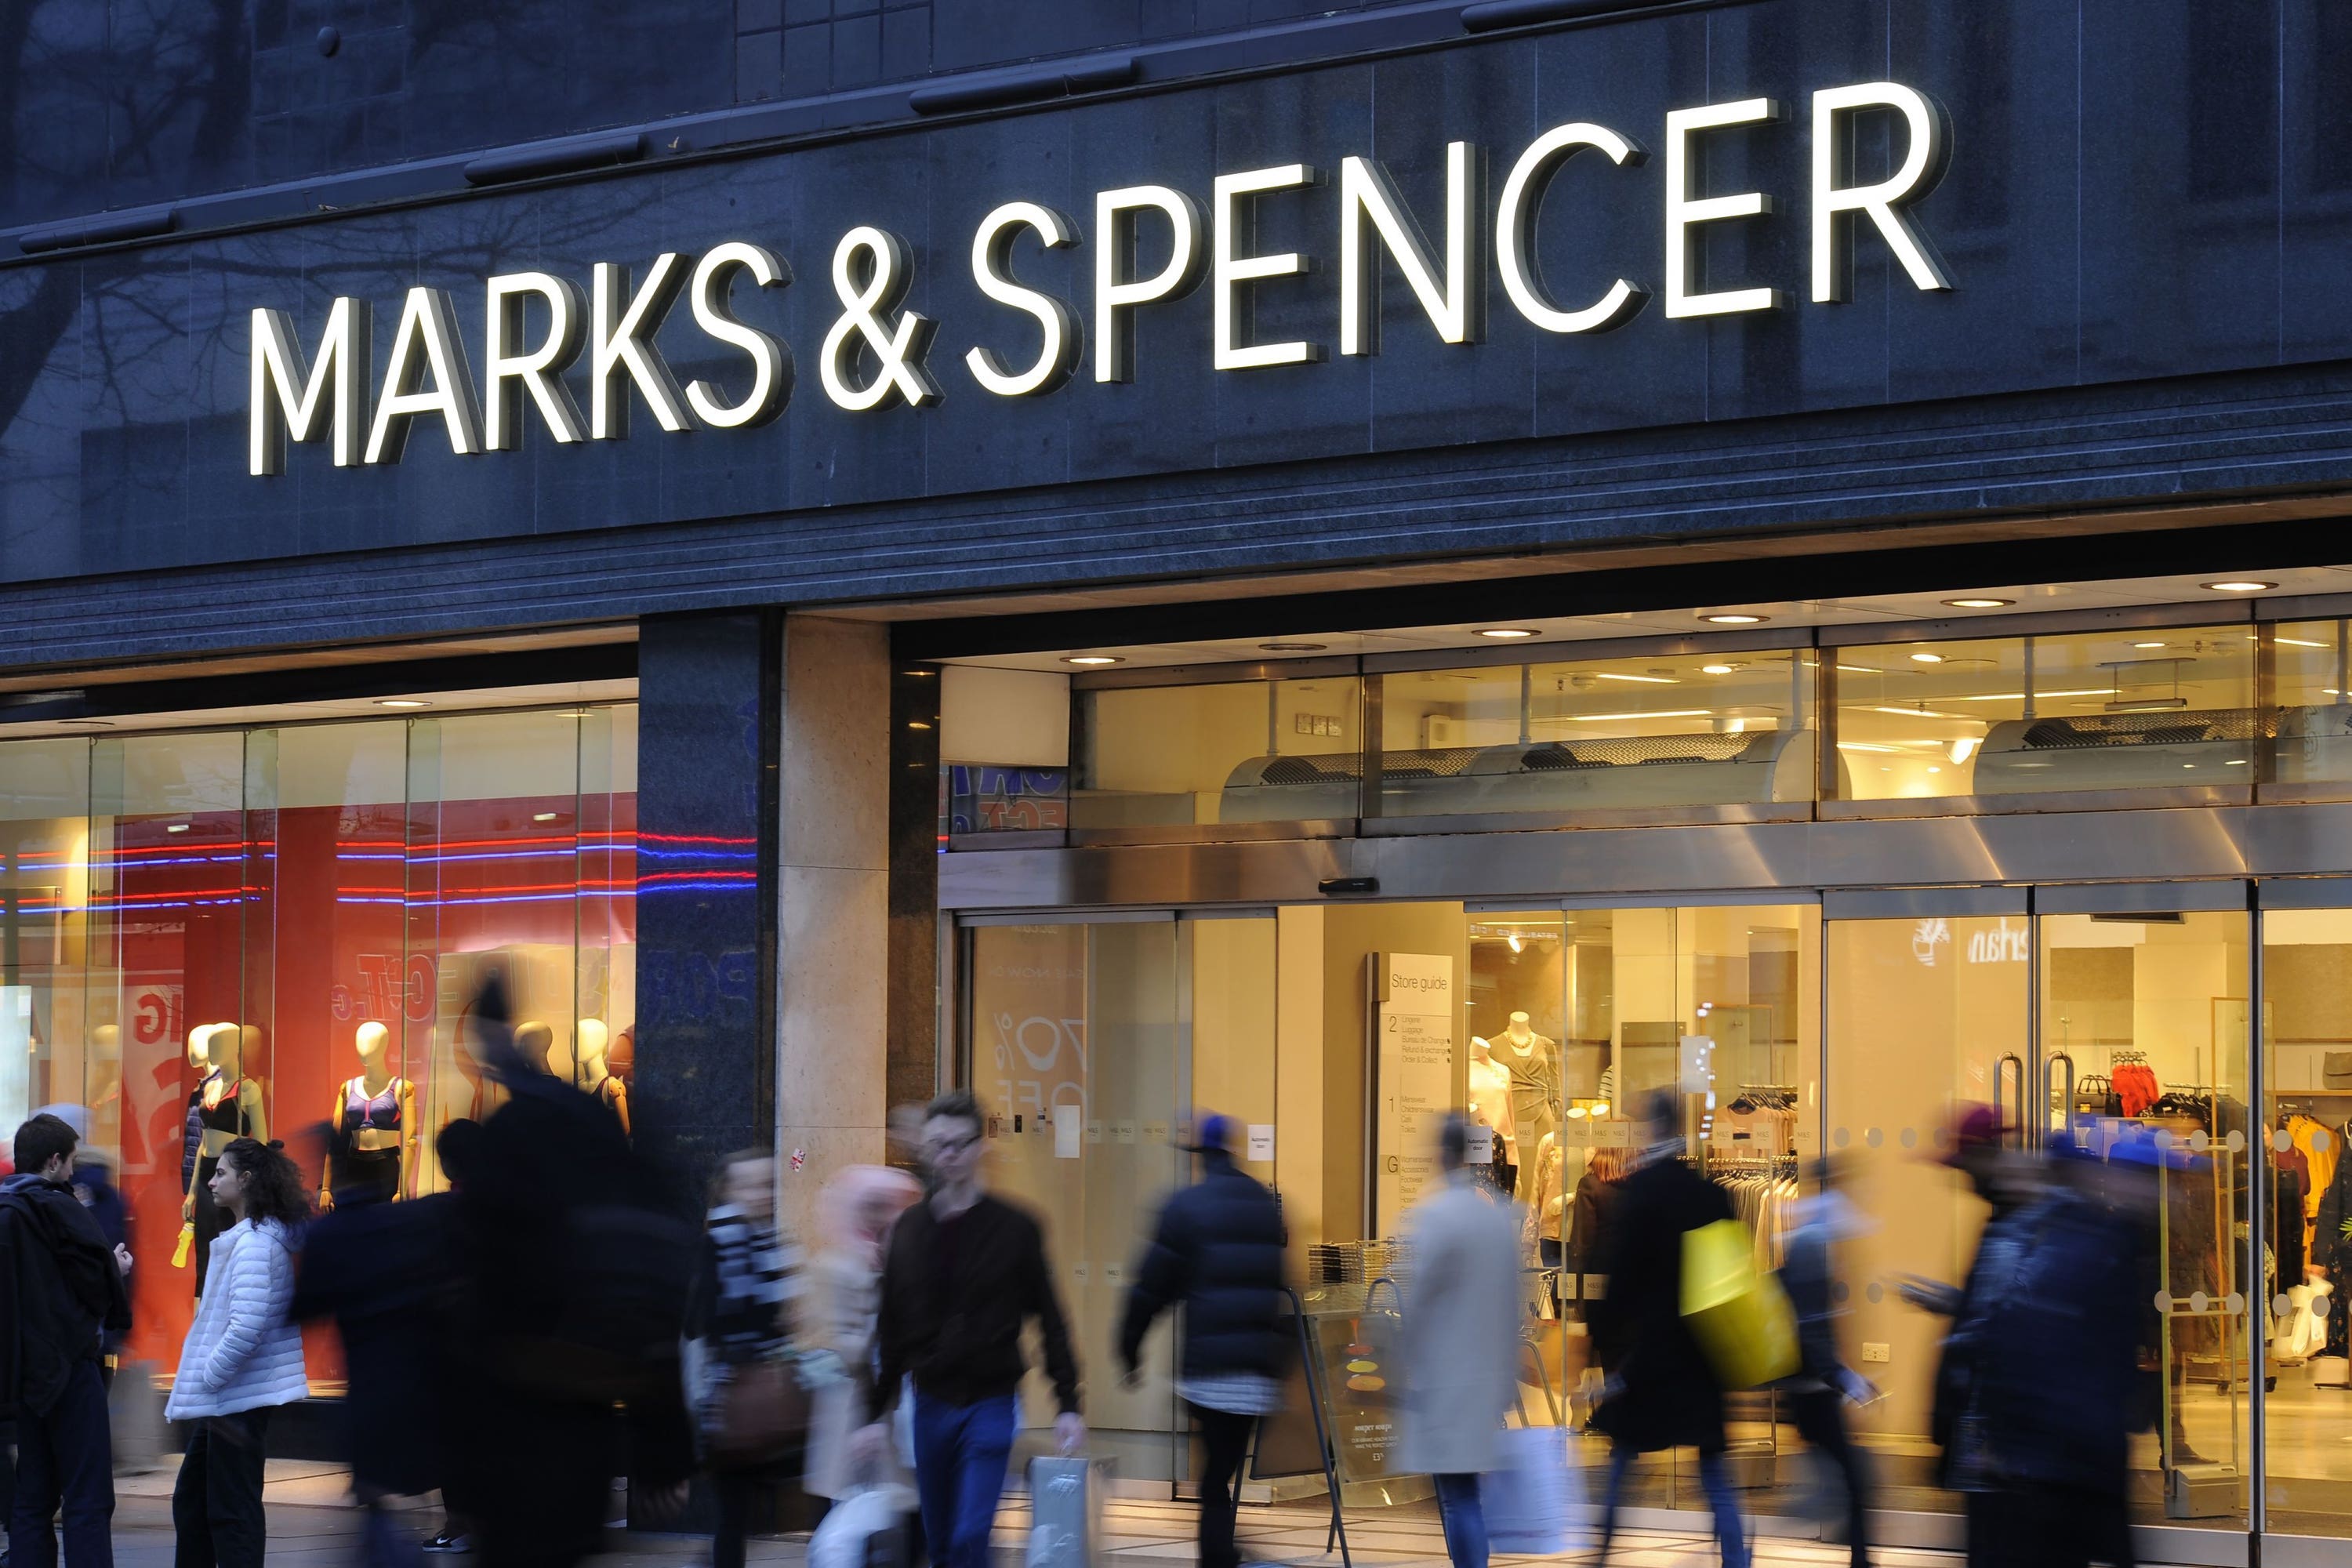 M&S wants to open ‘bigger, better stores’ (Charlotte Ball/PA)